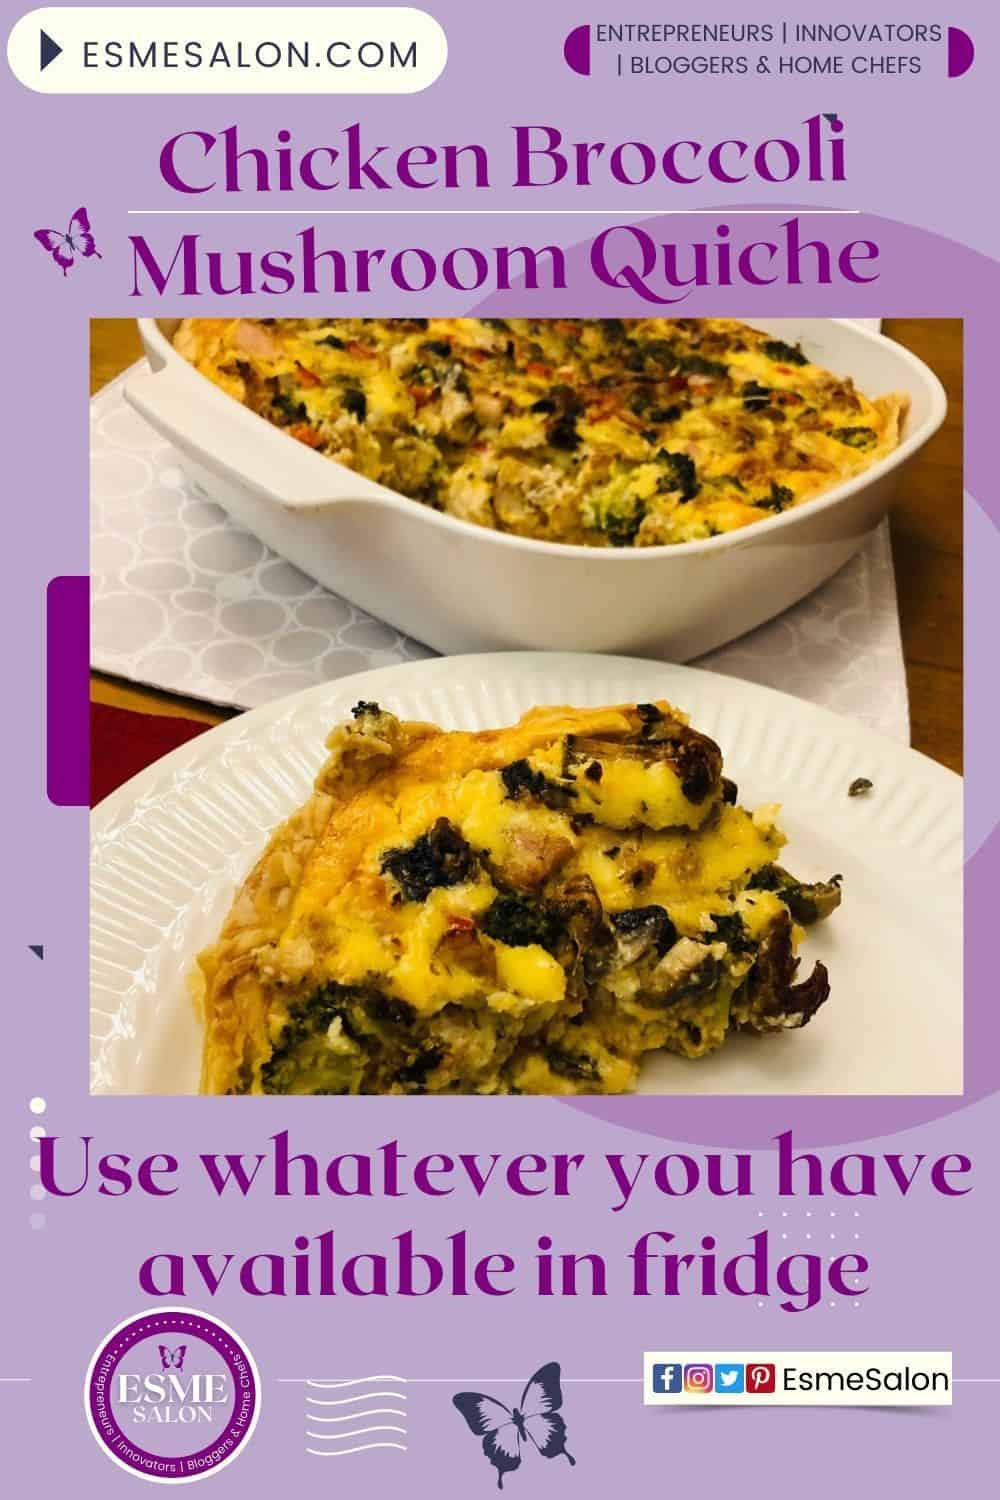 Chicken Broccoli Mushroom Quiche in ready made dough with egg base